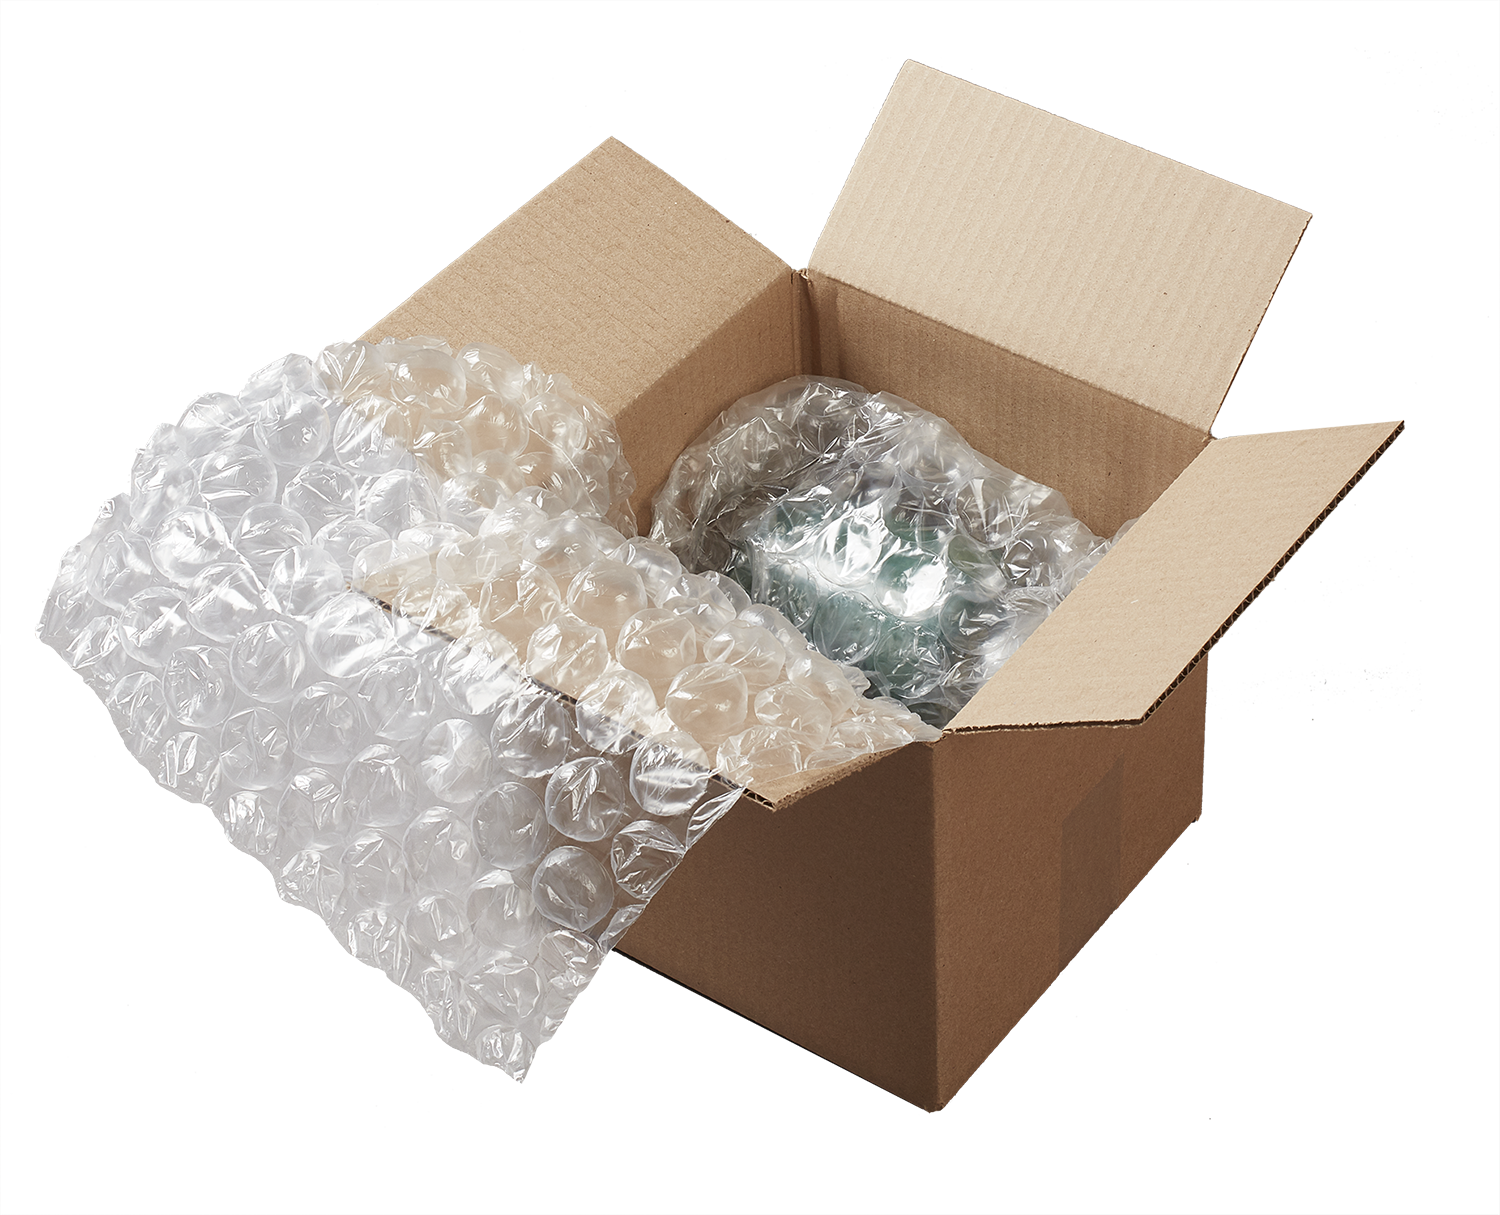 Packaging Materials - Bubble wrap